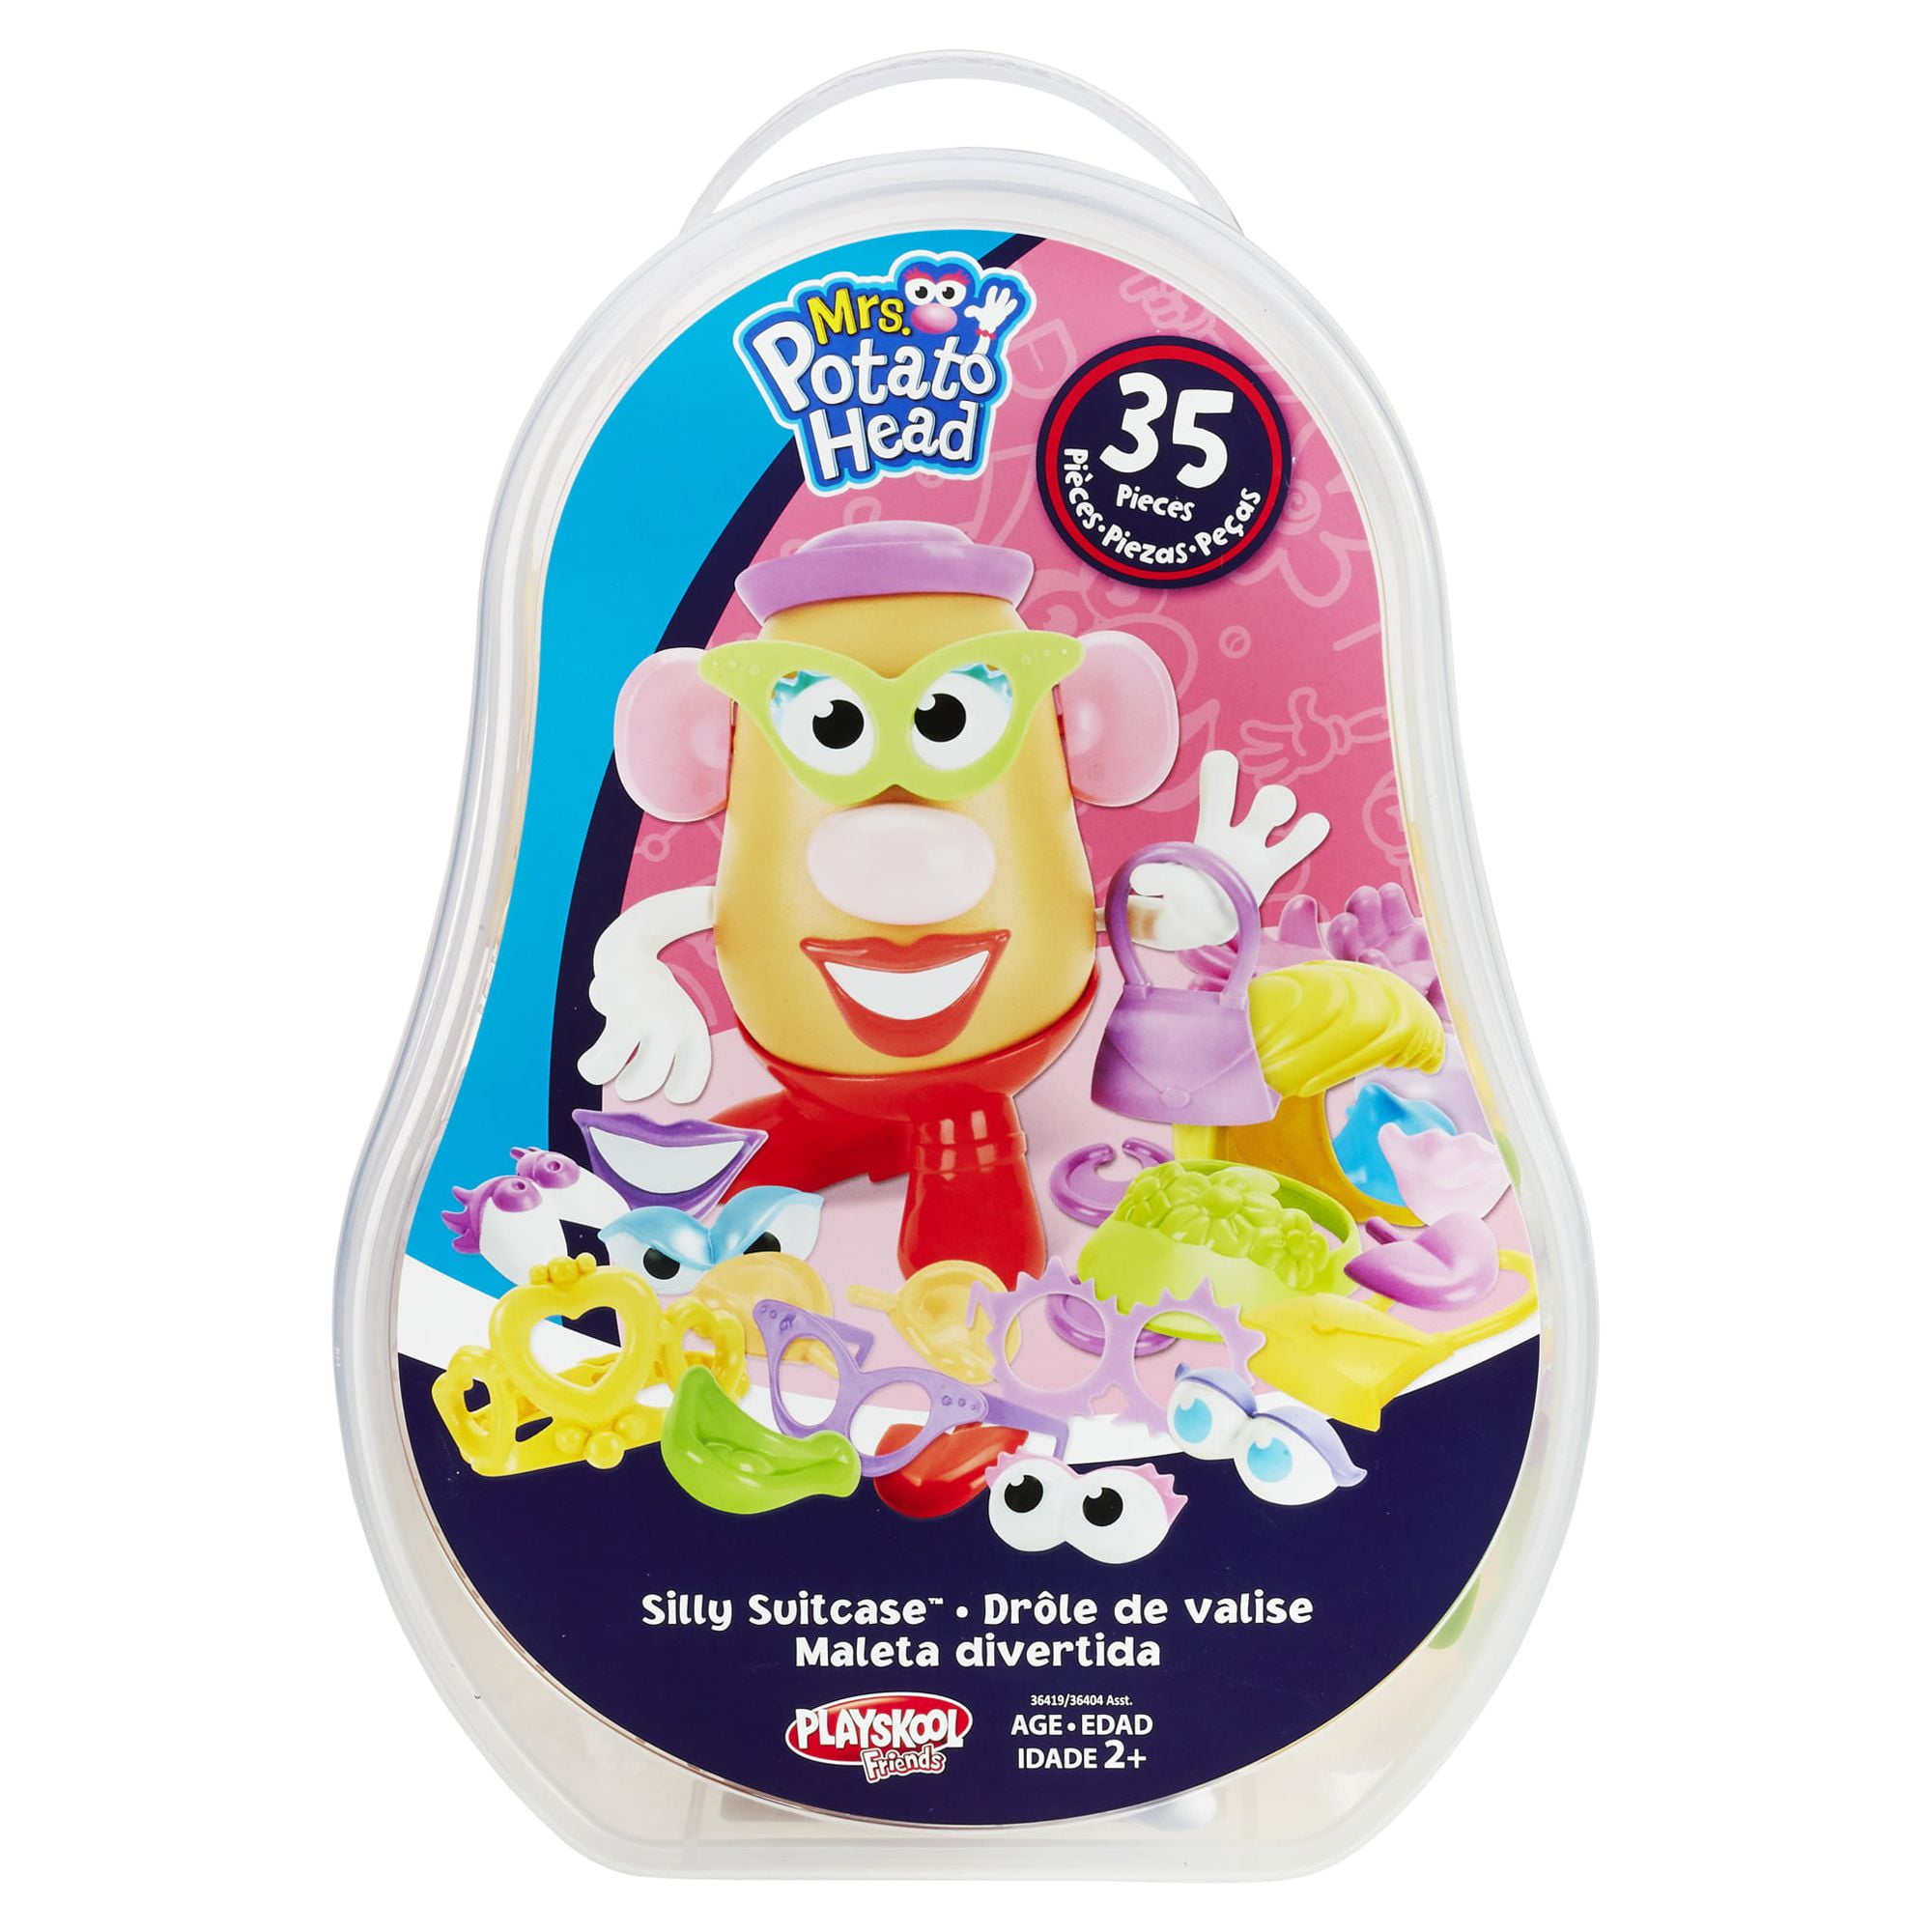 Potato Head Mr. and Mrs. Potato Head Classic Toy Assortment, Includes Parts  and Pieces to Create Funny Faces